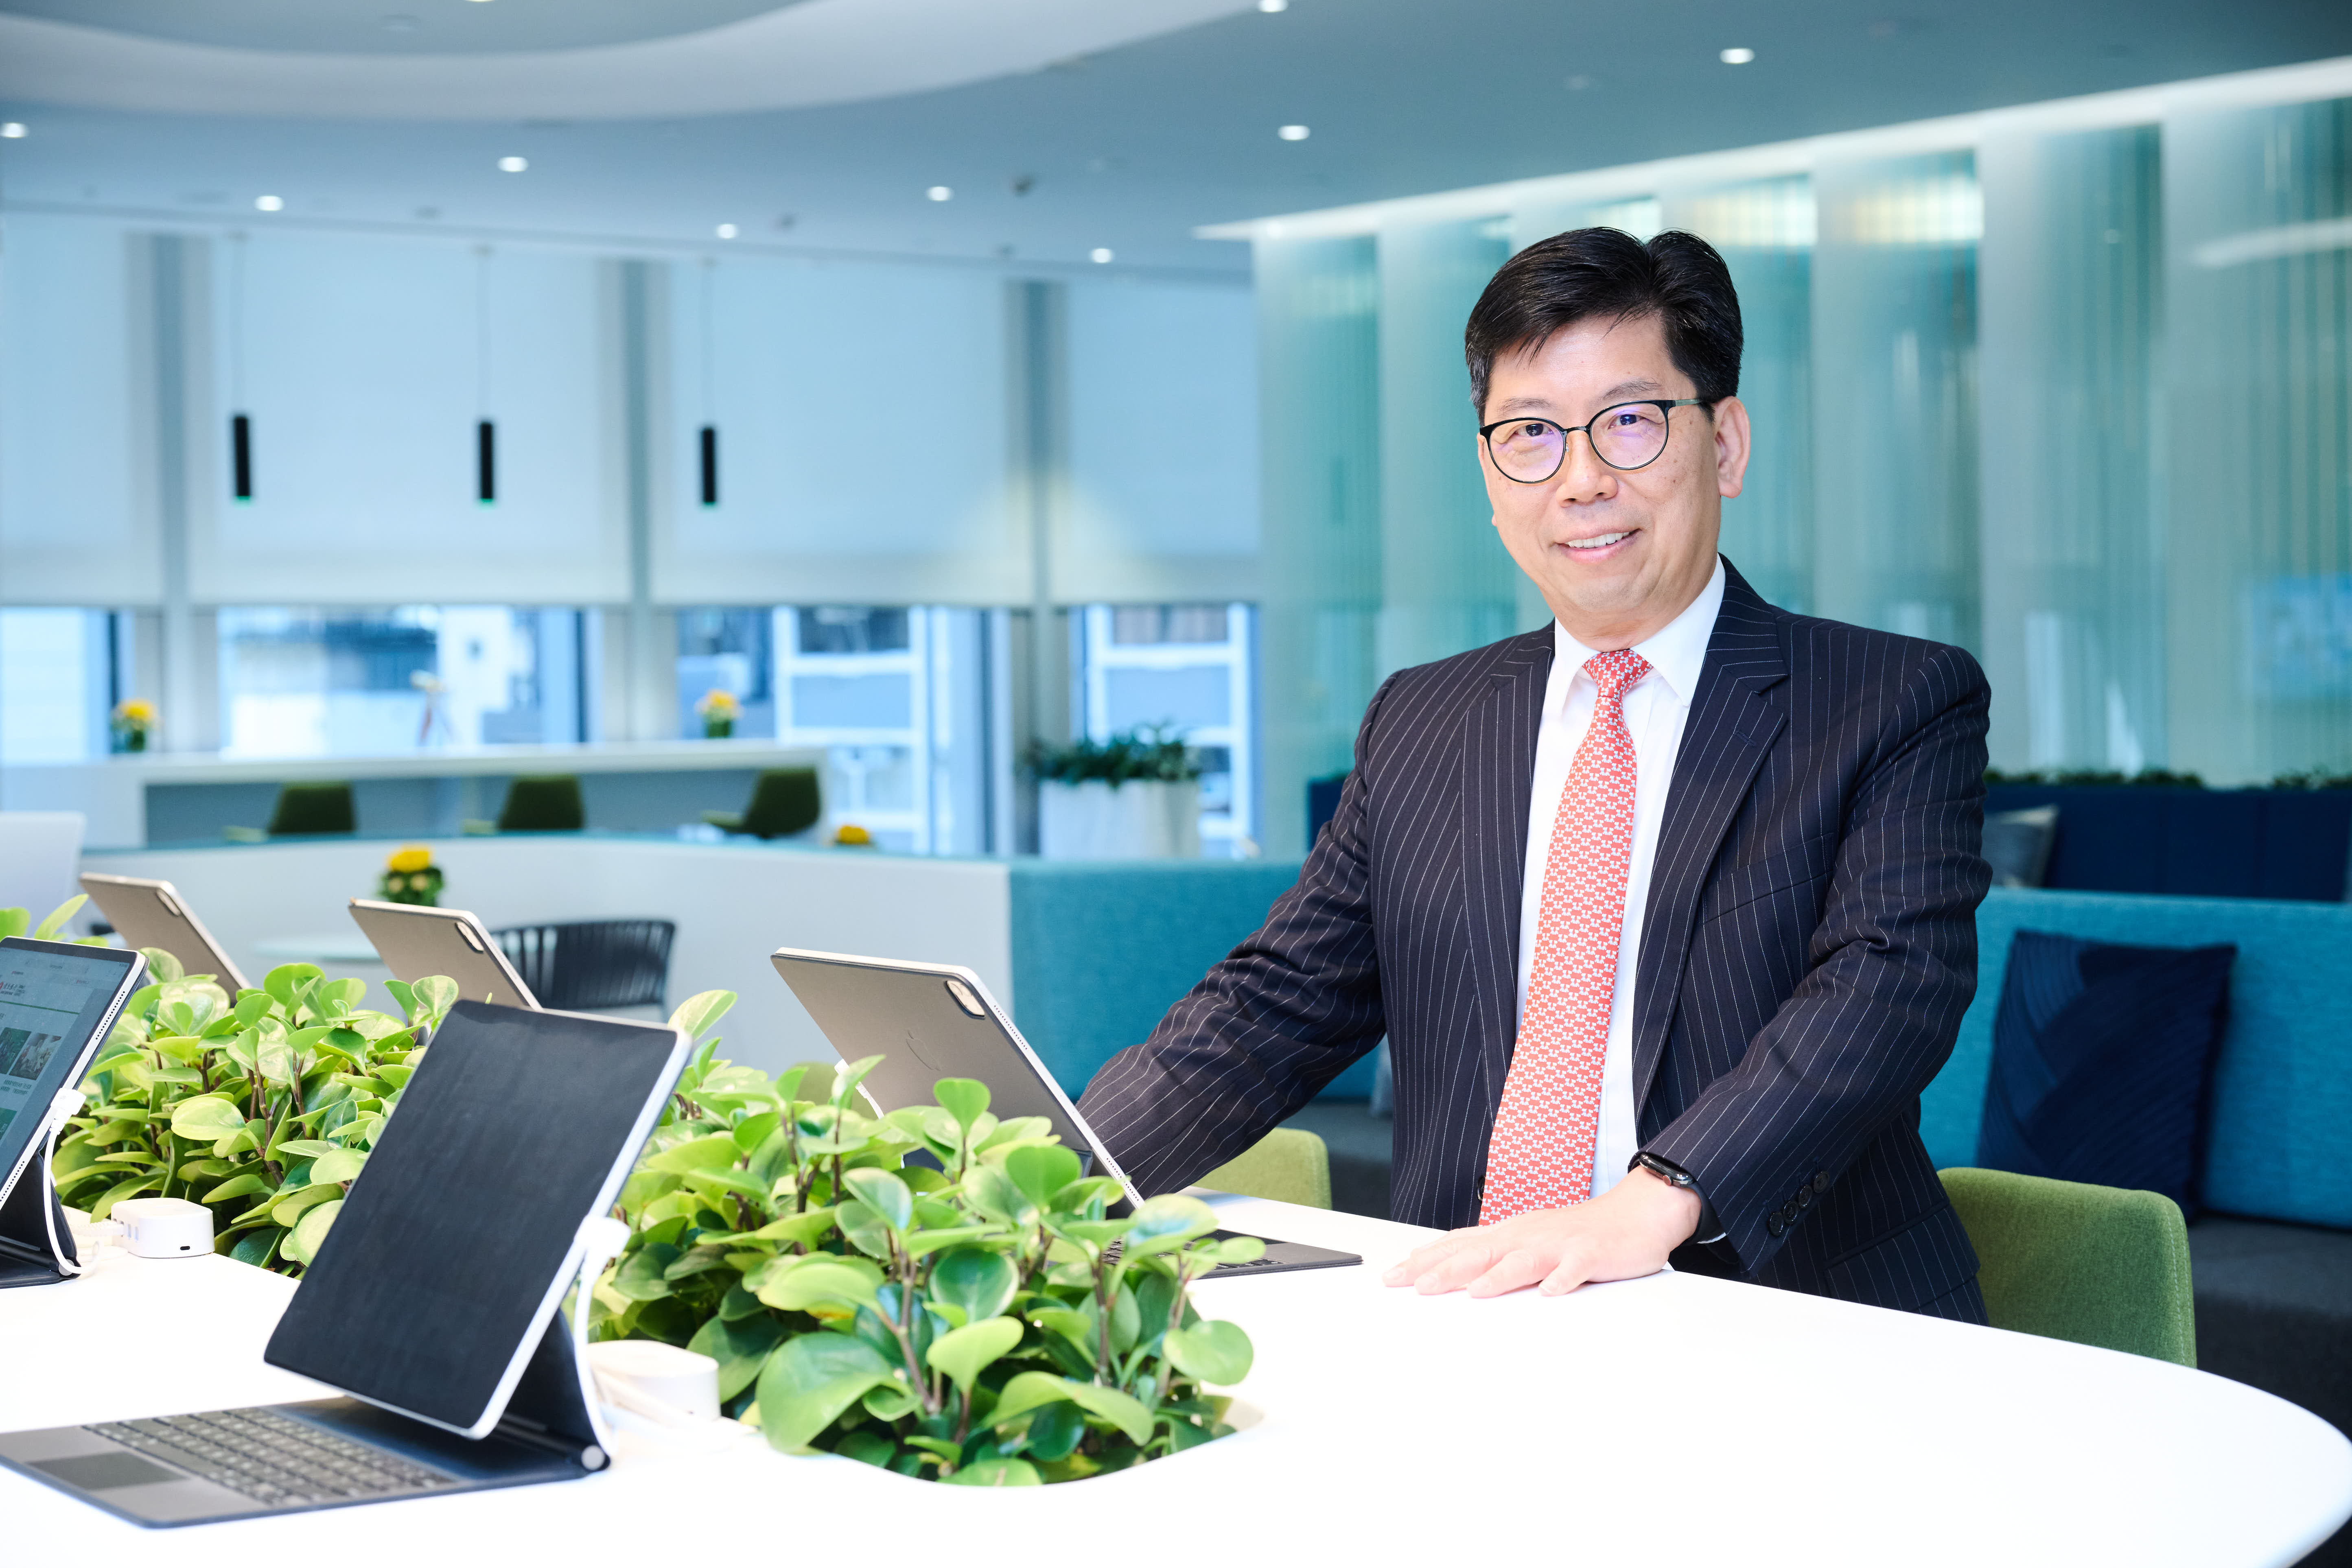 Mr Donald Lam, Head of Commercial Banking of Hang Seng Bank said that as digitalisation is gaining popularity among SMEs, Hang Seng has stepped up its Digital Business Banking services to help customers handle their financial matters from anywhere at any time.